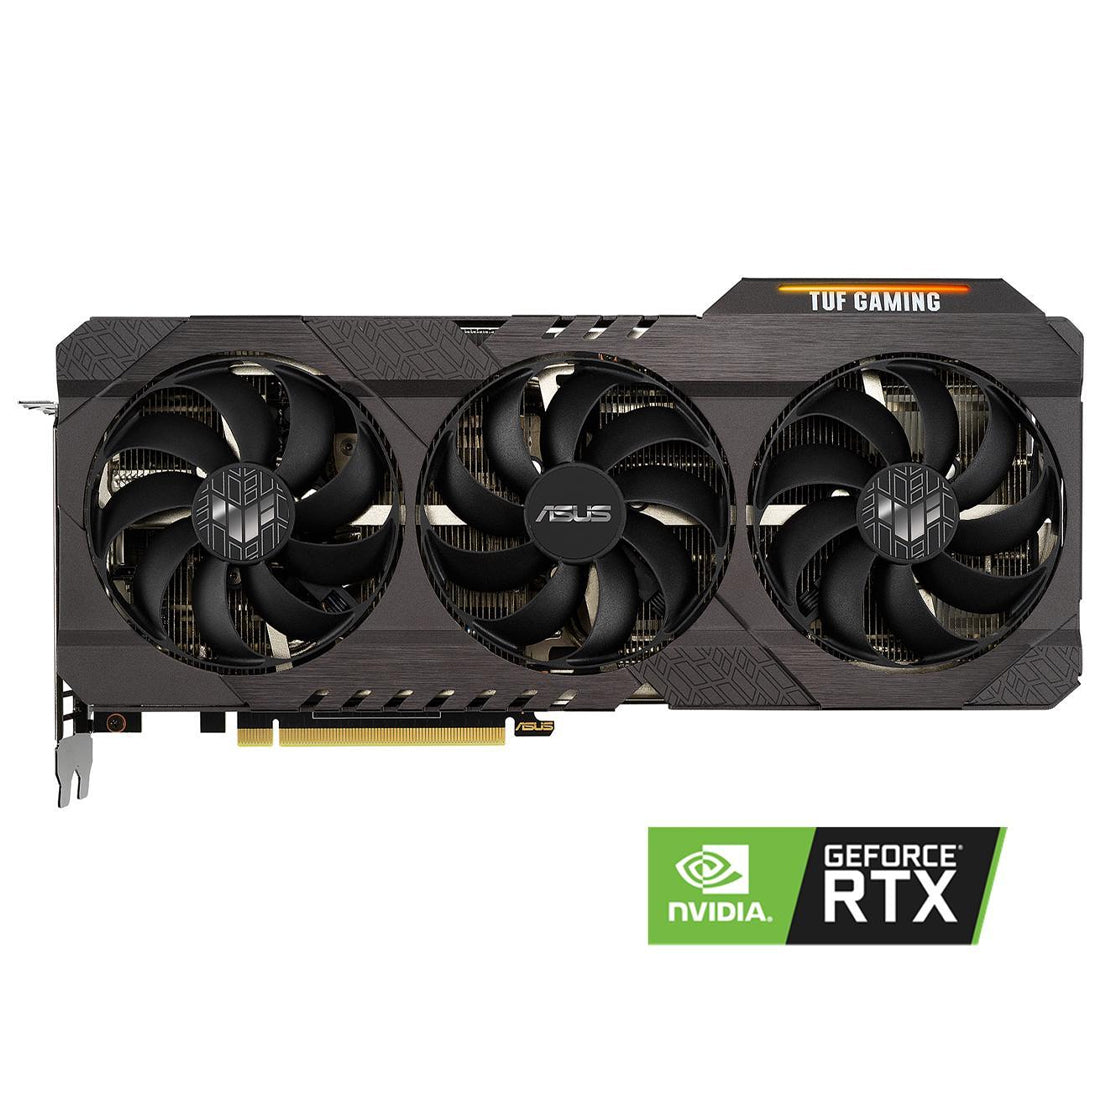 ASUS TUF Gaming RTX 3070 OC Edition Graphics Card GDDR6 8GB 256-Bit with DLSS AI Rendering